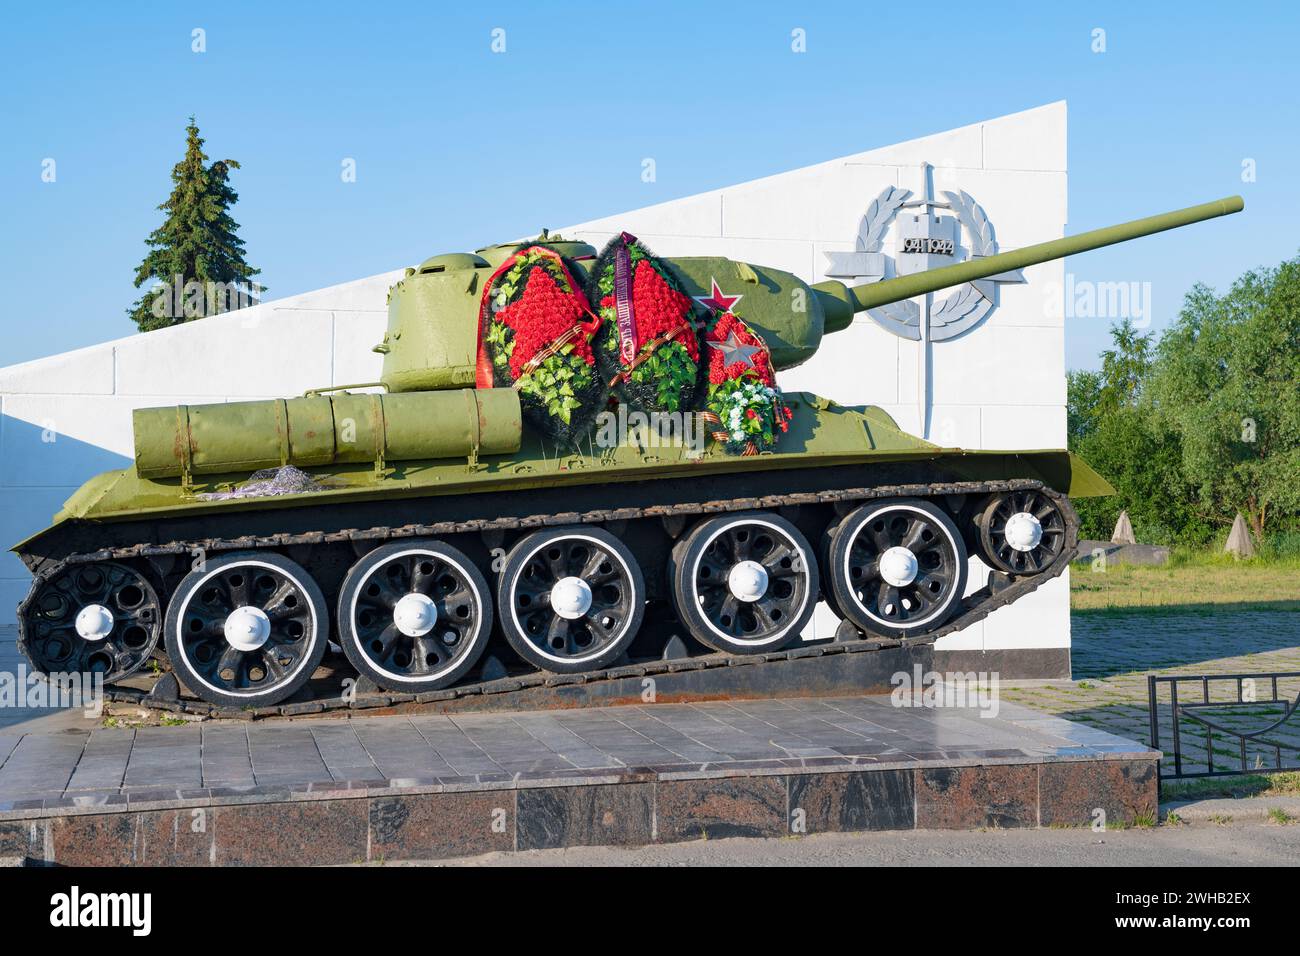 VELIKY NOVGOROD, RUSSIA - JUNE 26, 2022: Tank T-34-85 - fragment of the 'Defense Line' memorial on a sunny June day Stock Photo